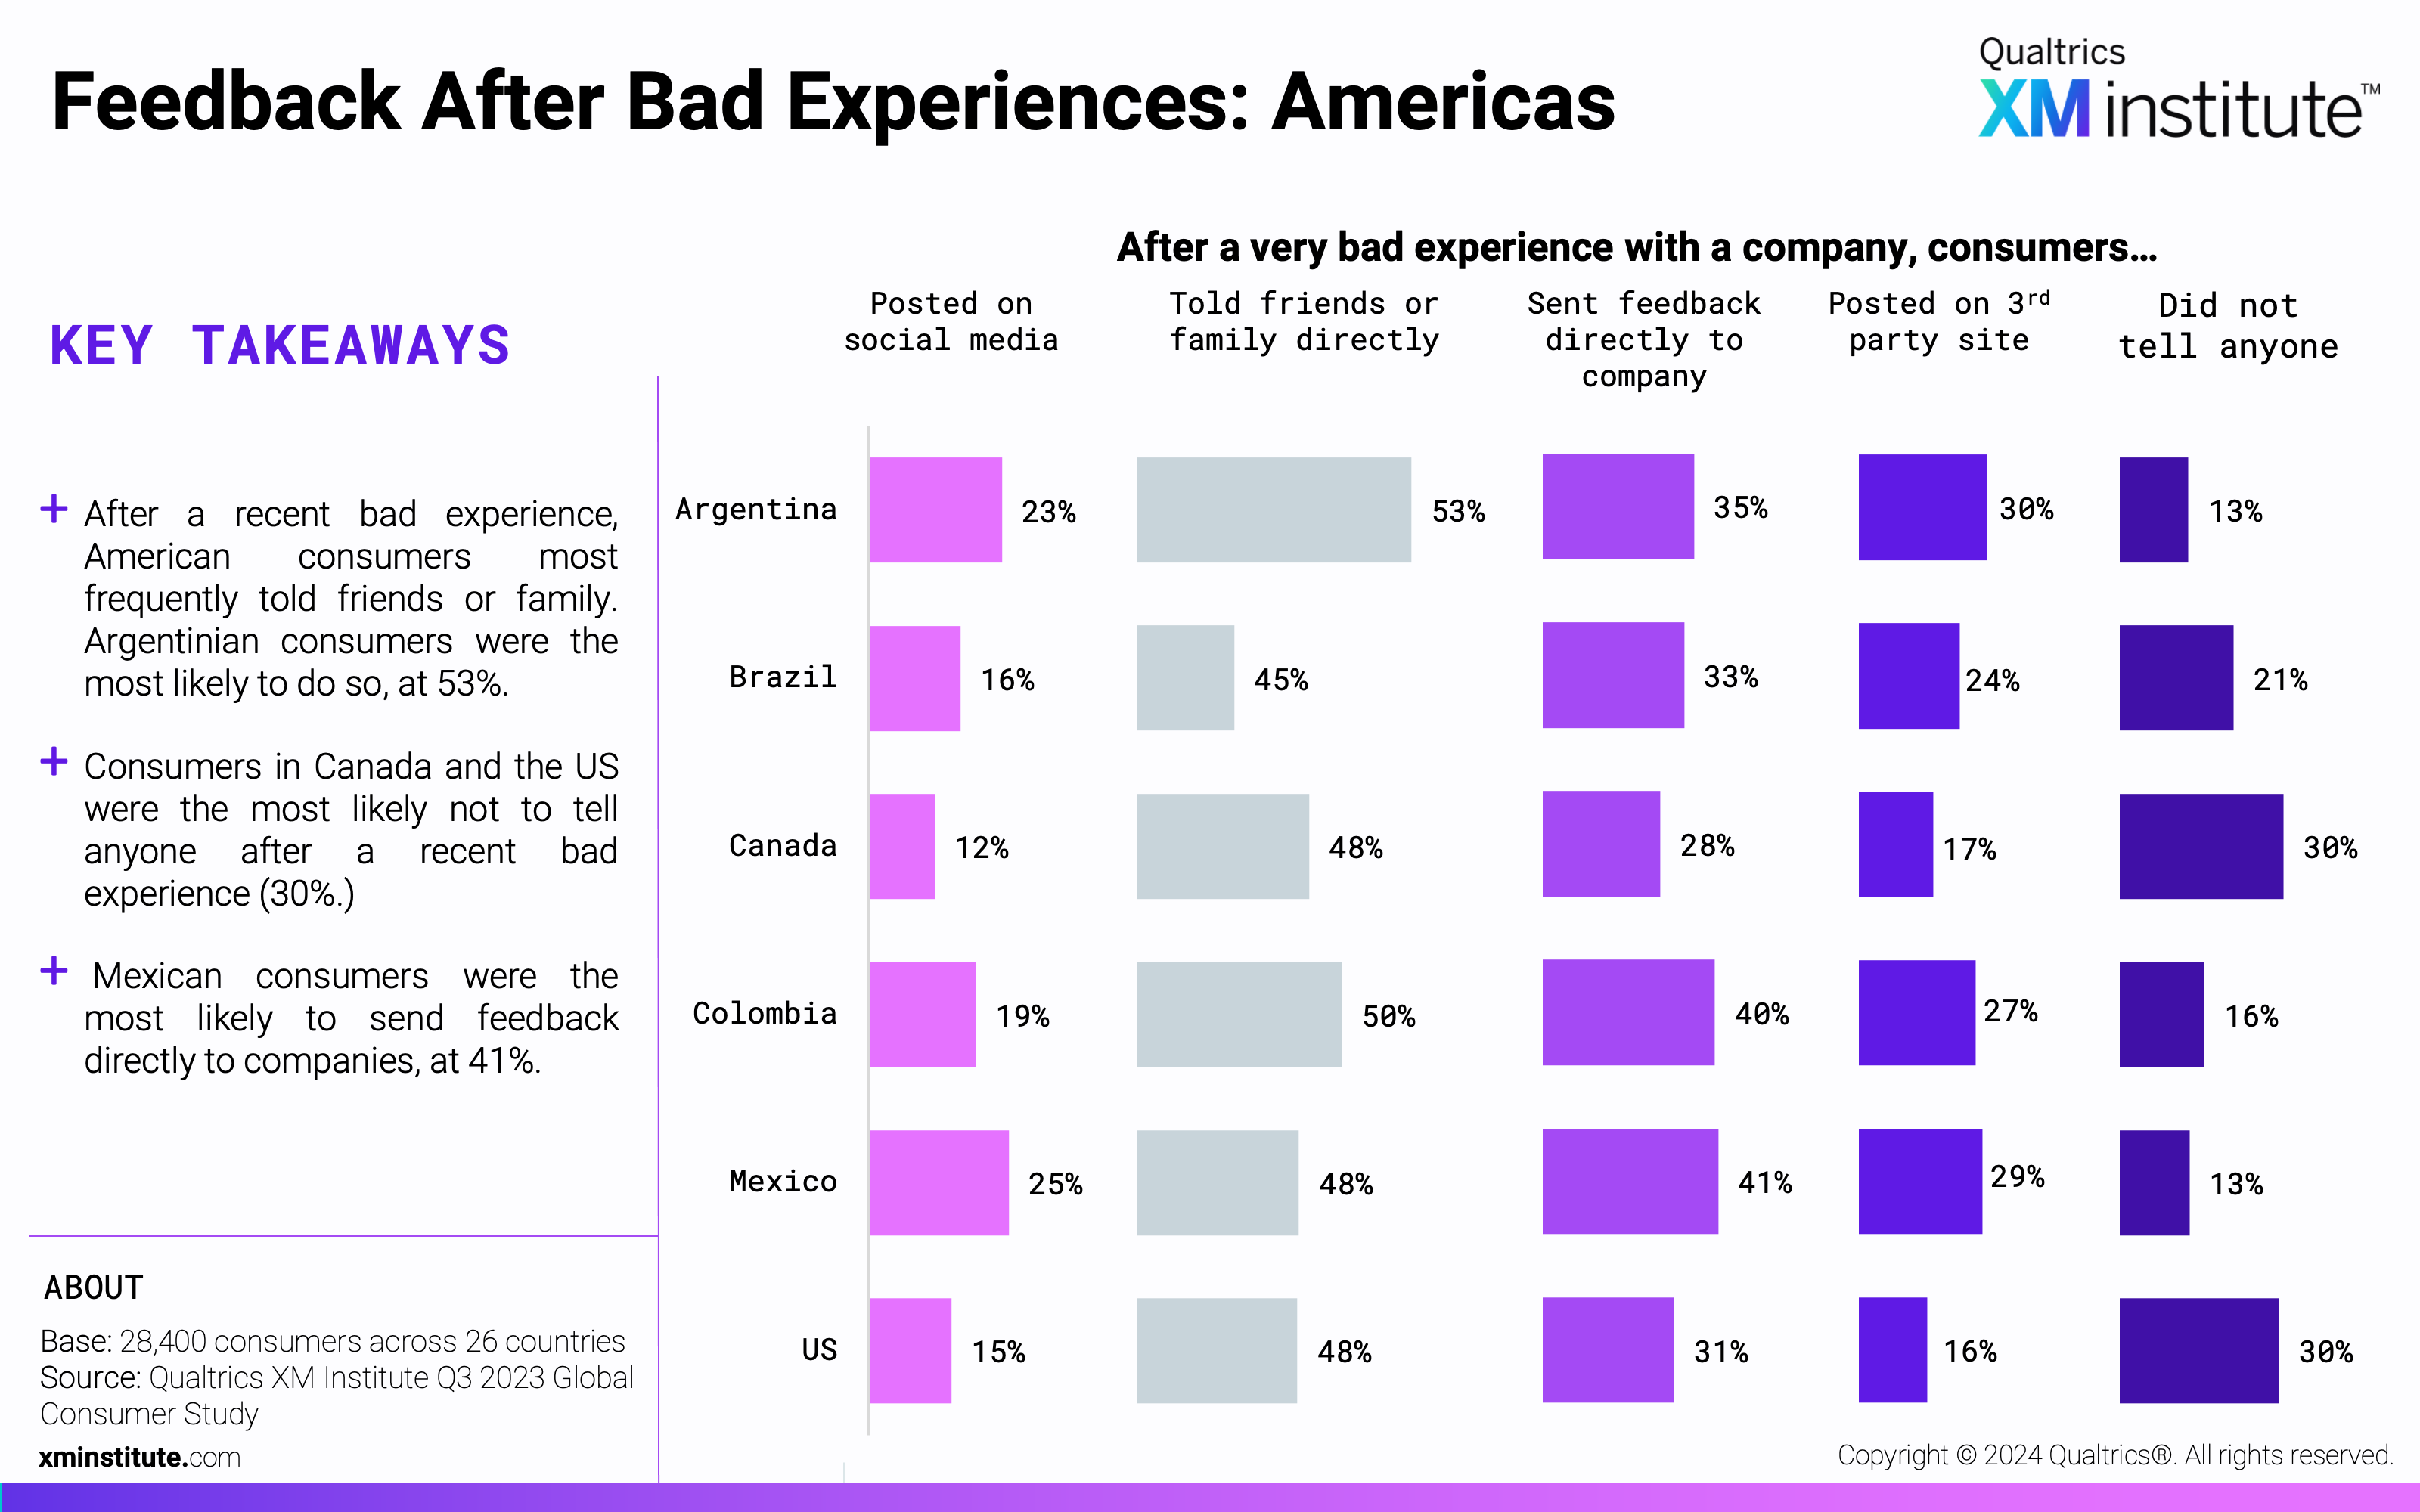 These charts show the percentage of consumers from each country that shared feedback using each method after a bad experience with a company.